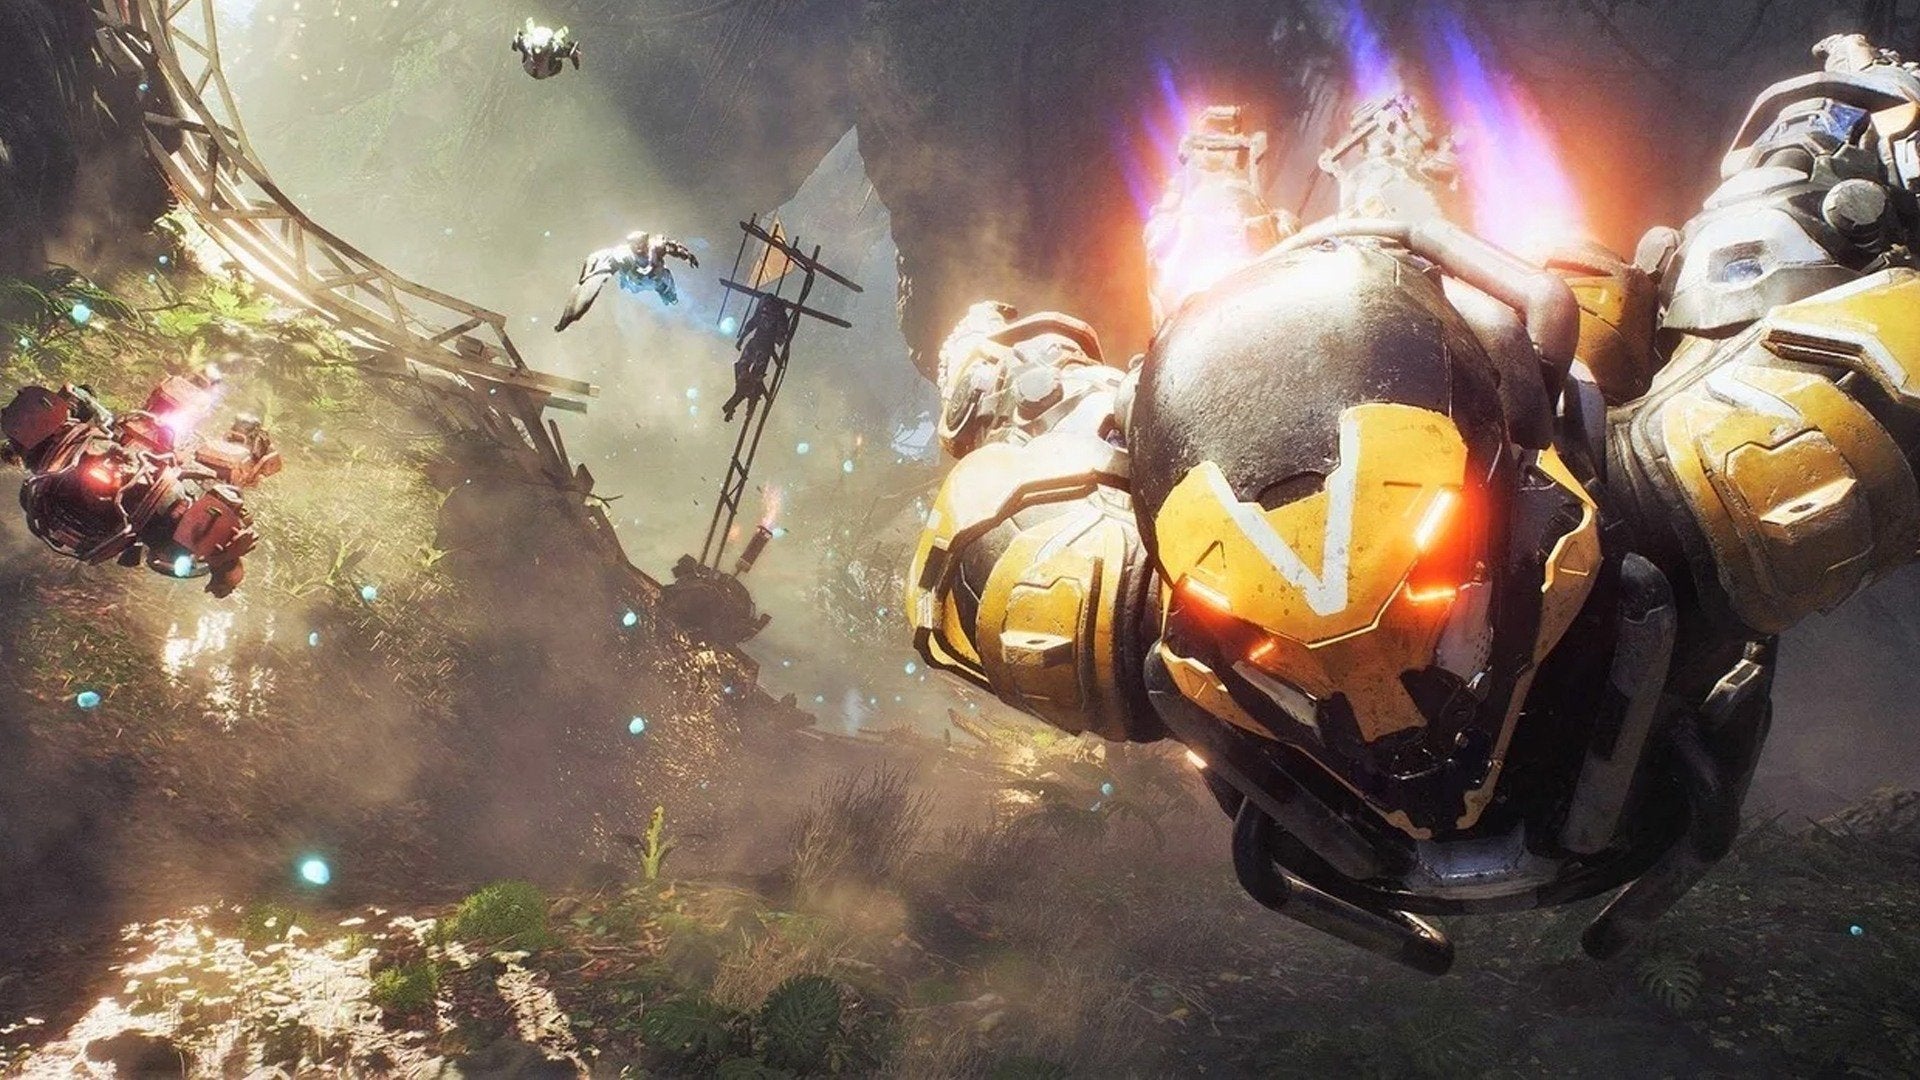 rytme farve manipulere BioWare's Anthem rework could get cancelled by EA this week - report | VG247